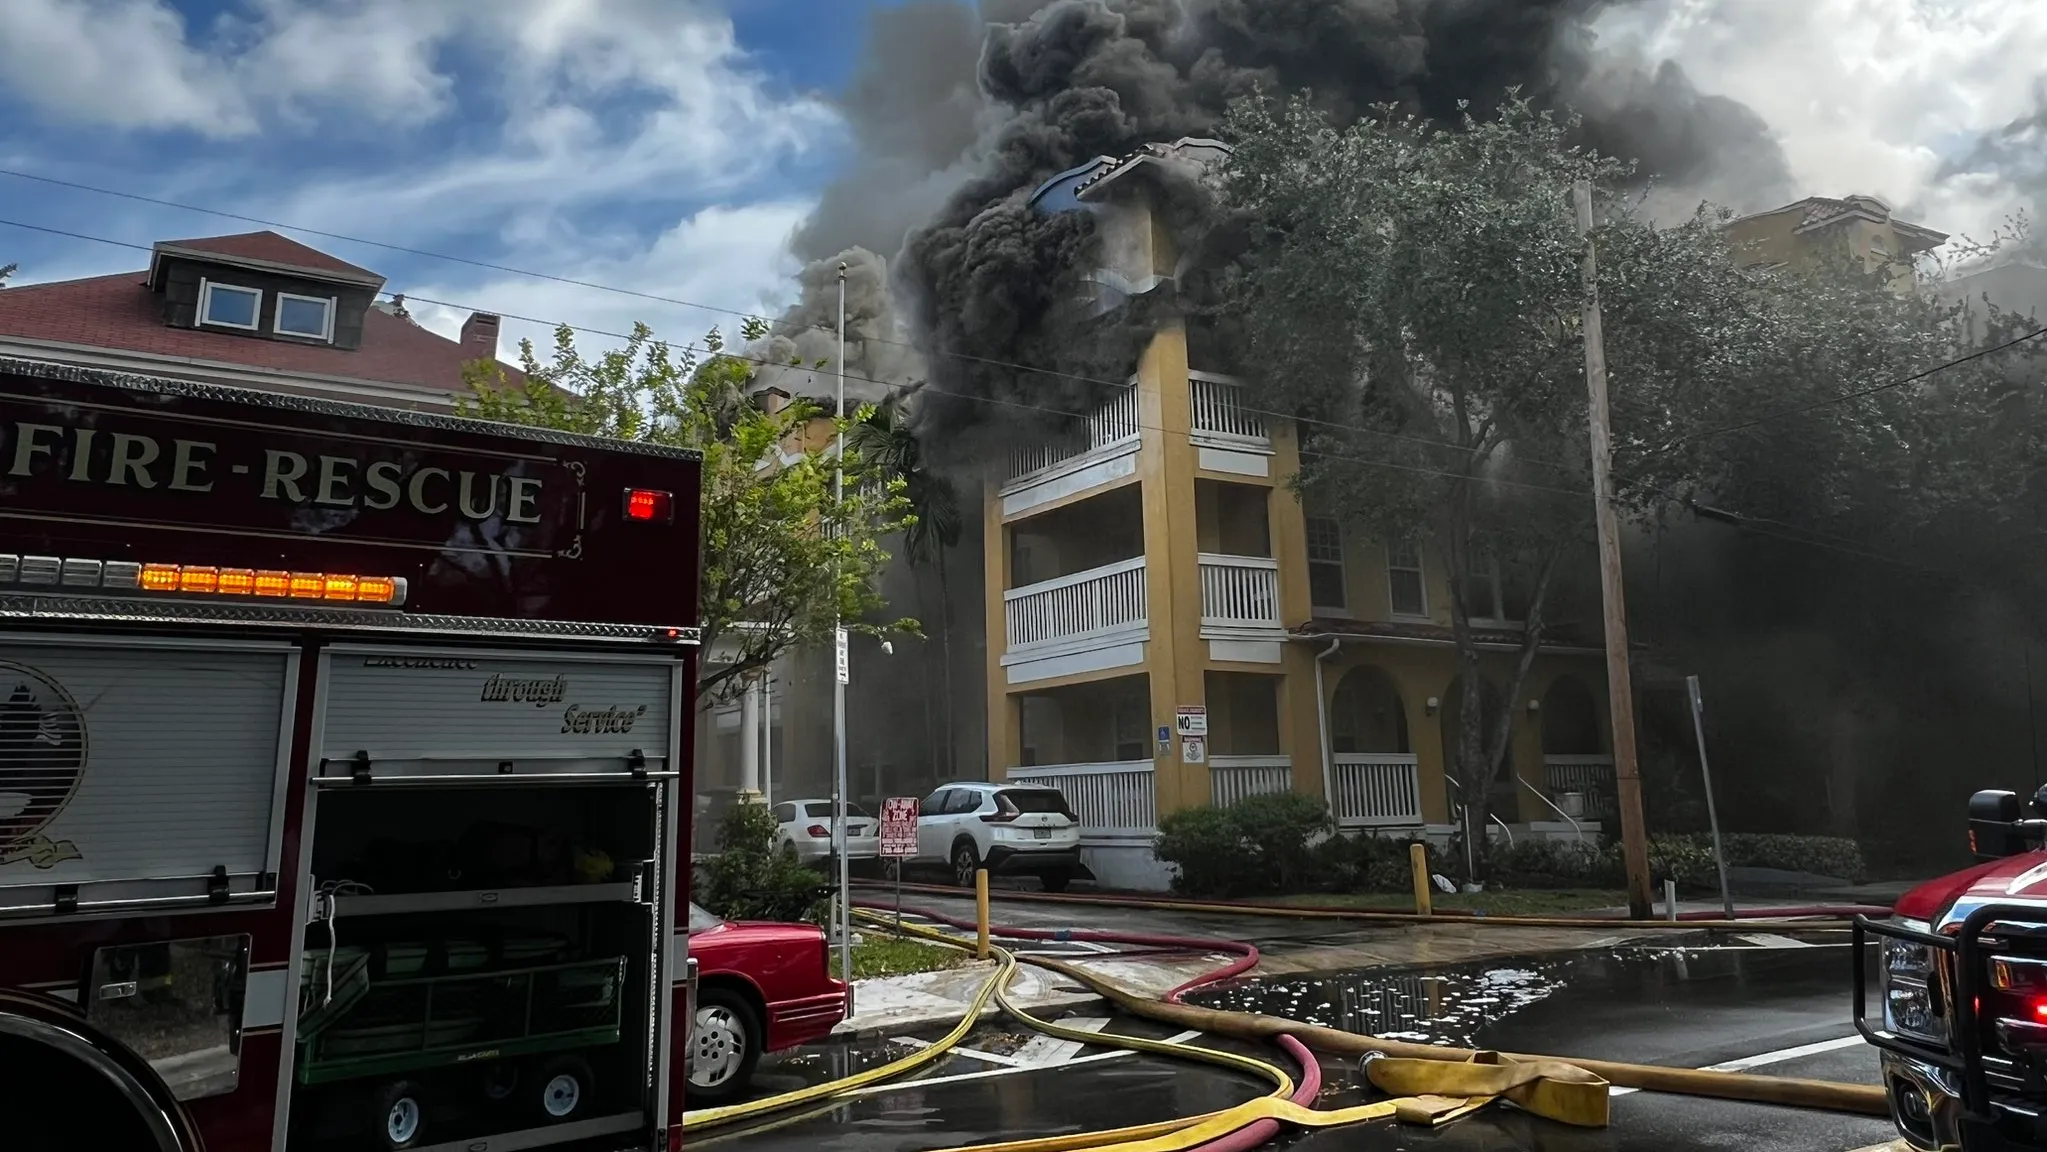 Miami building fire: Man found shot, firefighters rescue residents amid massive blaze